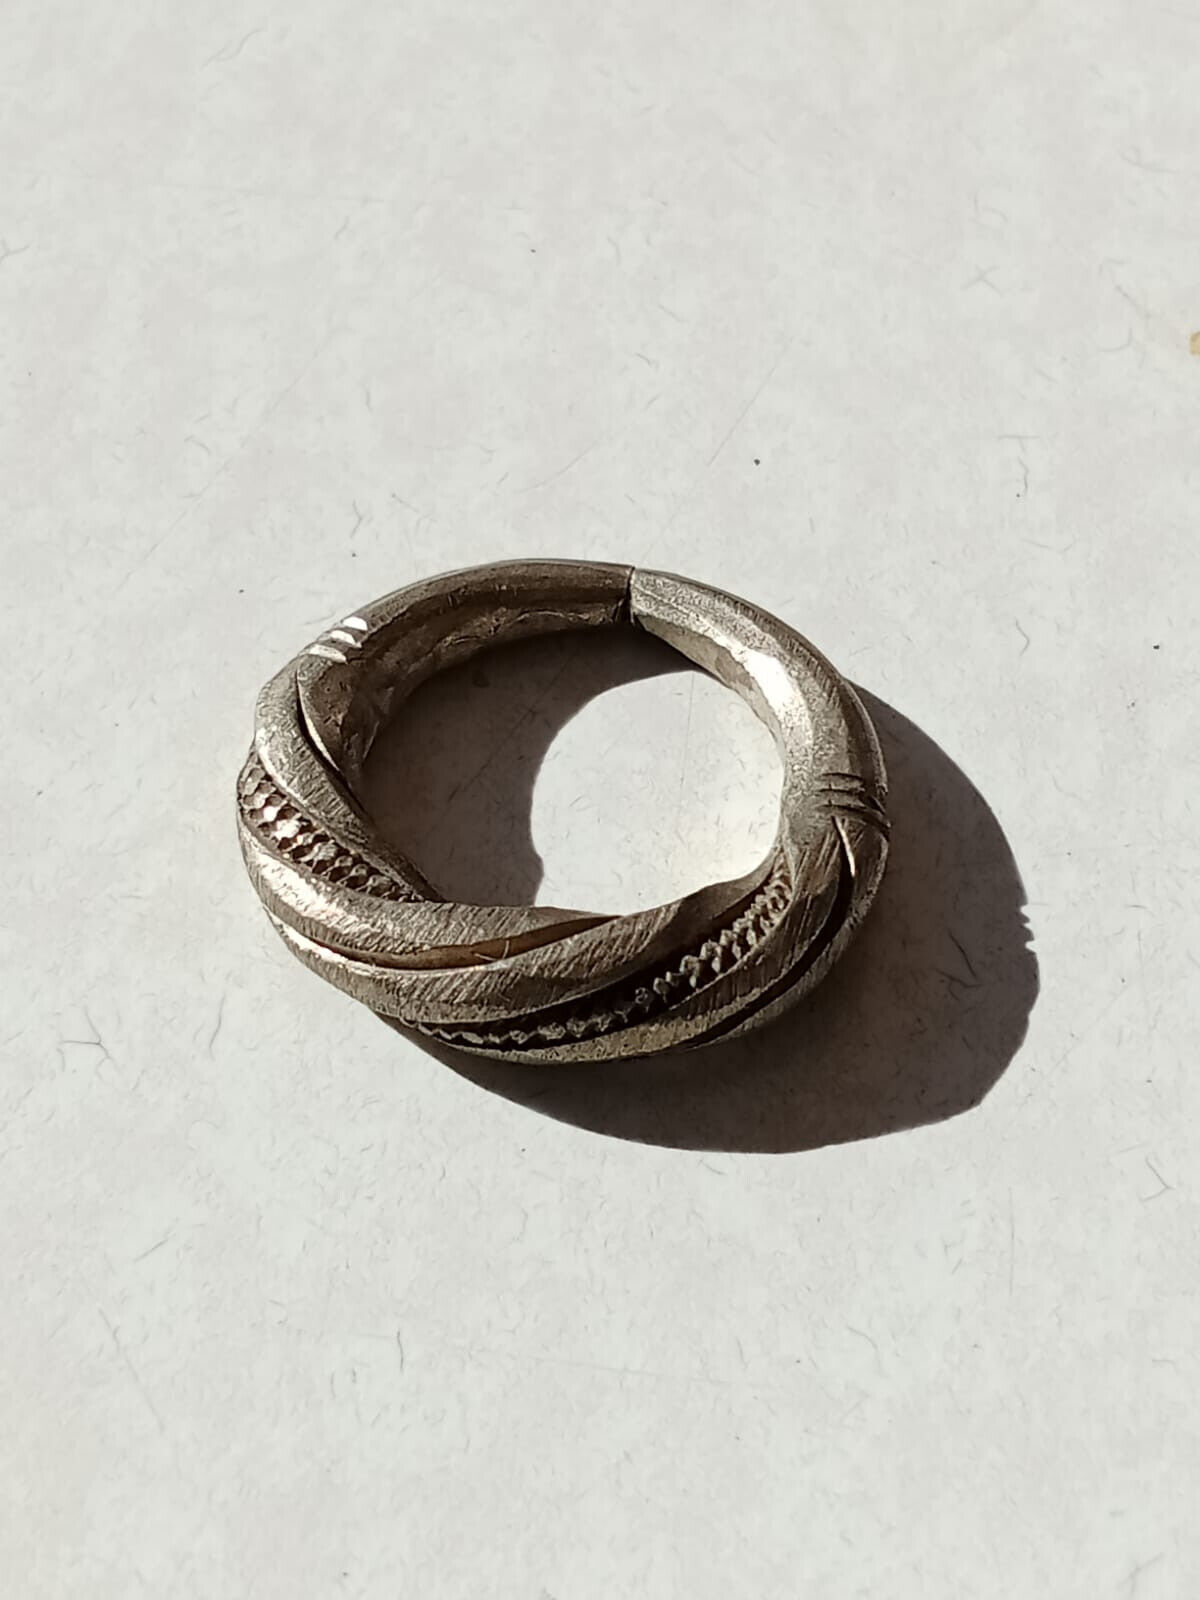 A GENUINE RARE ANCIENT VIKING RING SILVRED TWISTED ARTIFACT AUTHENTIC ANTIQUE